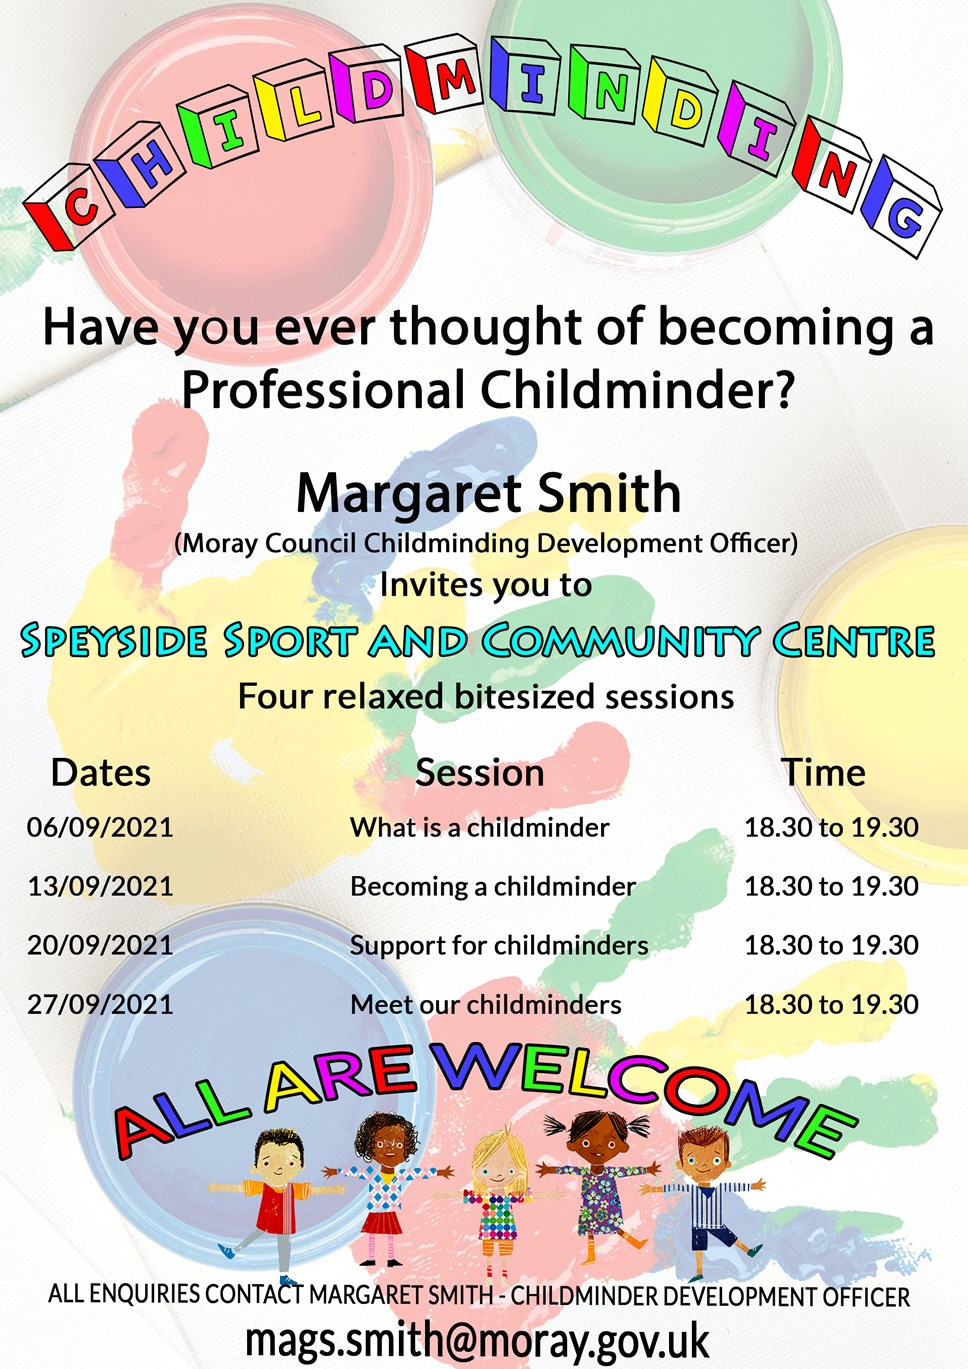 Childminding recruitment event in Speyside